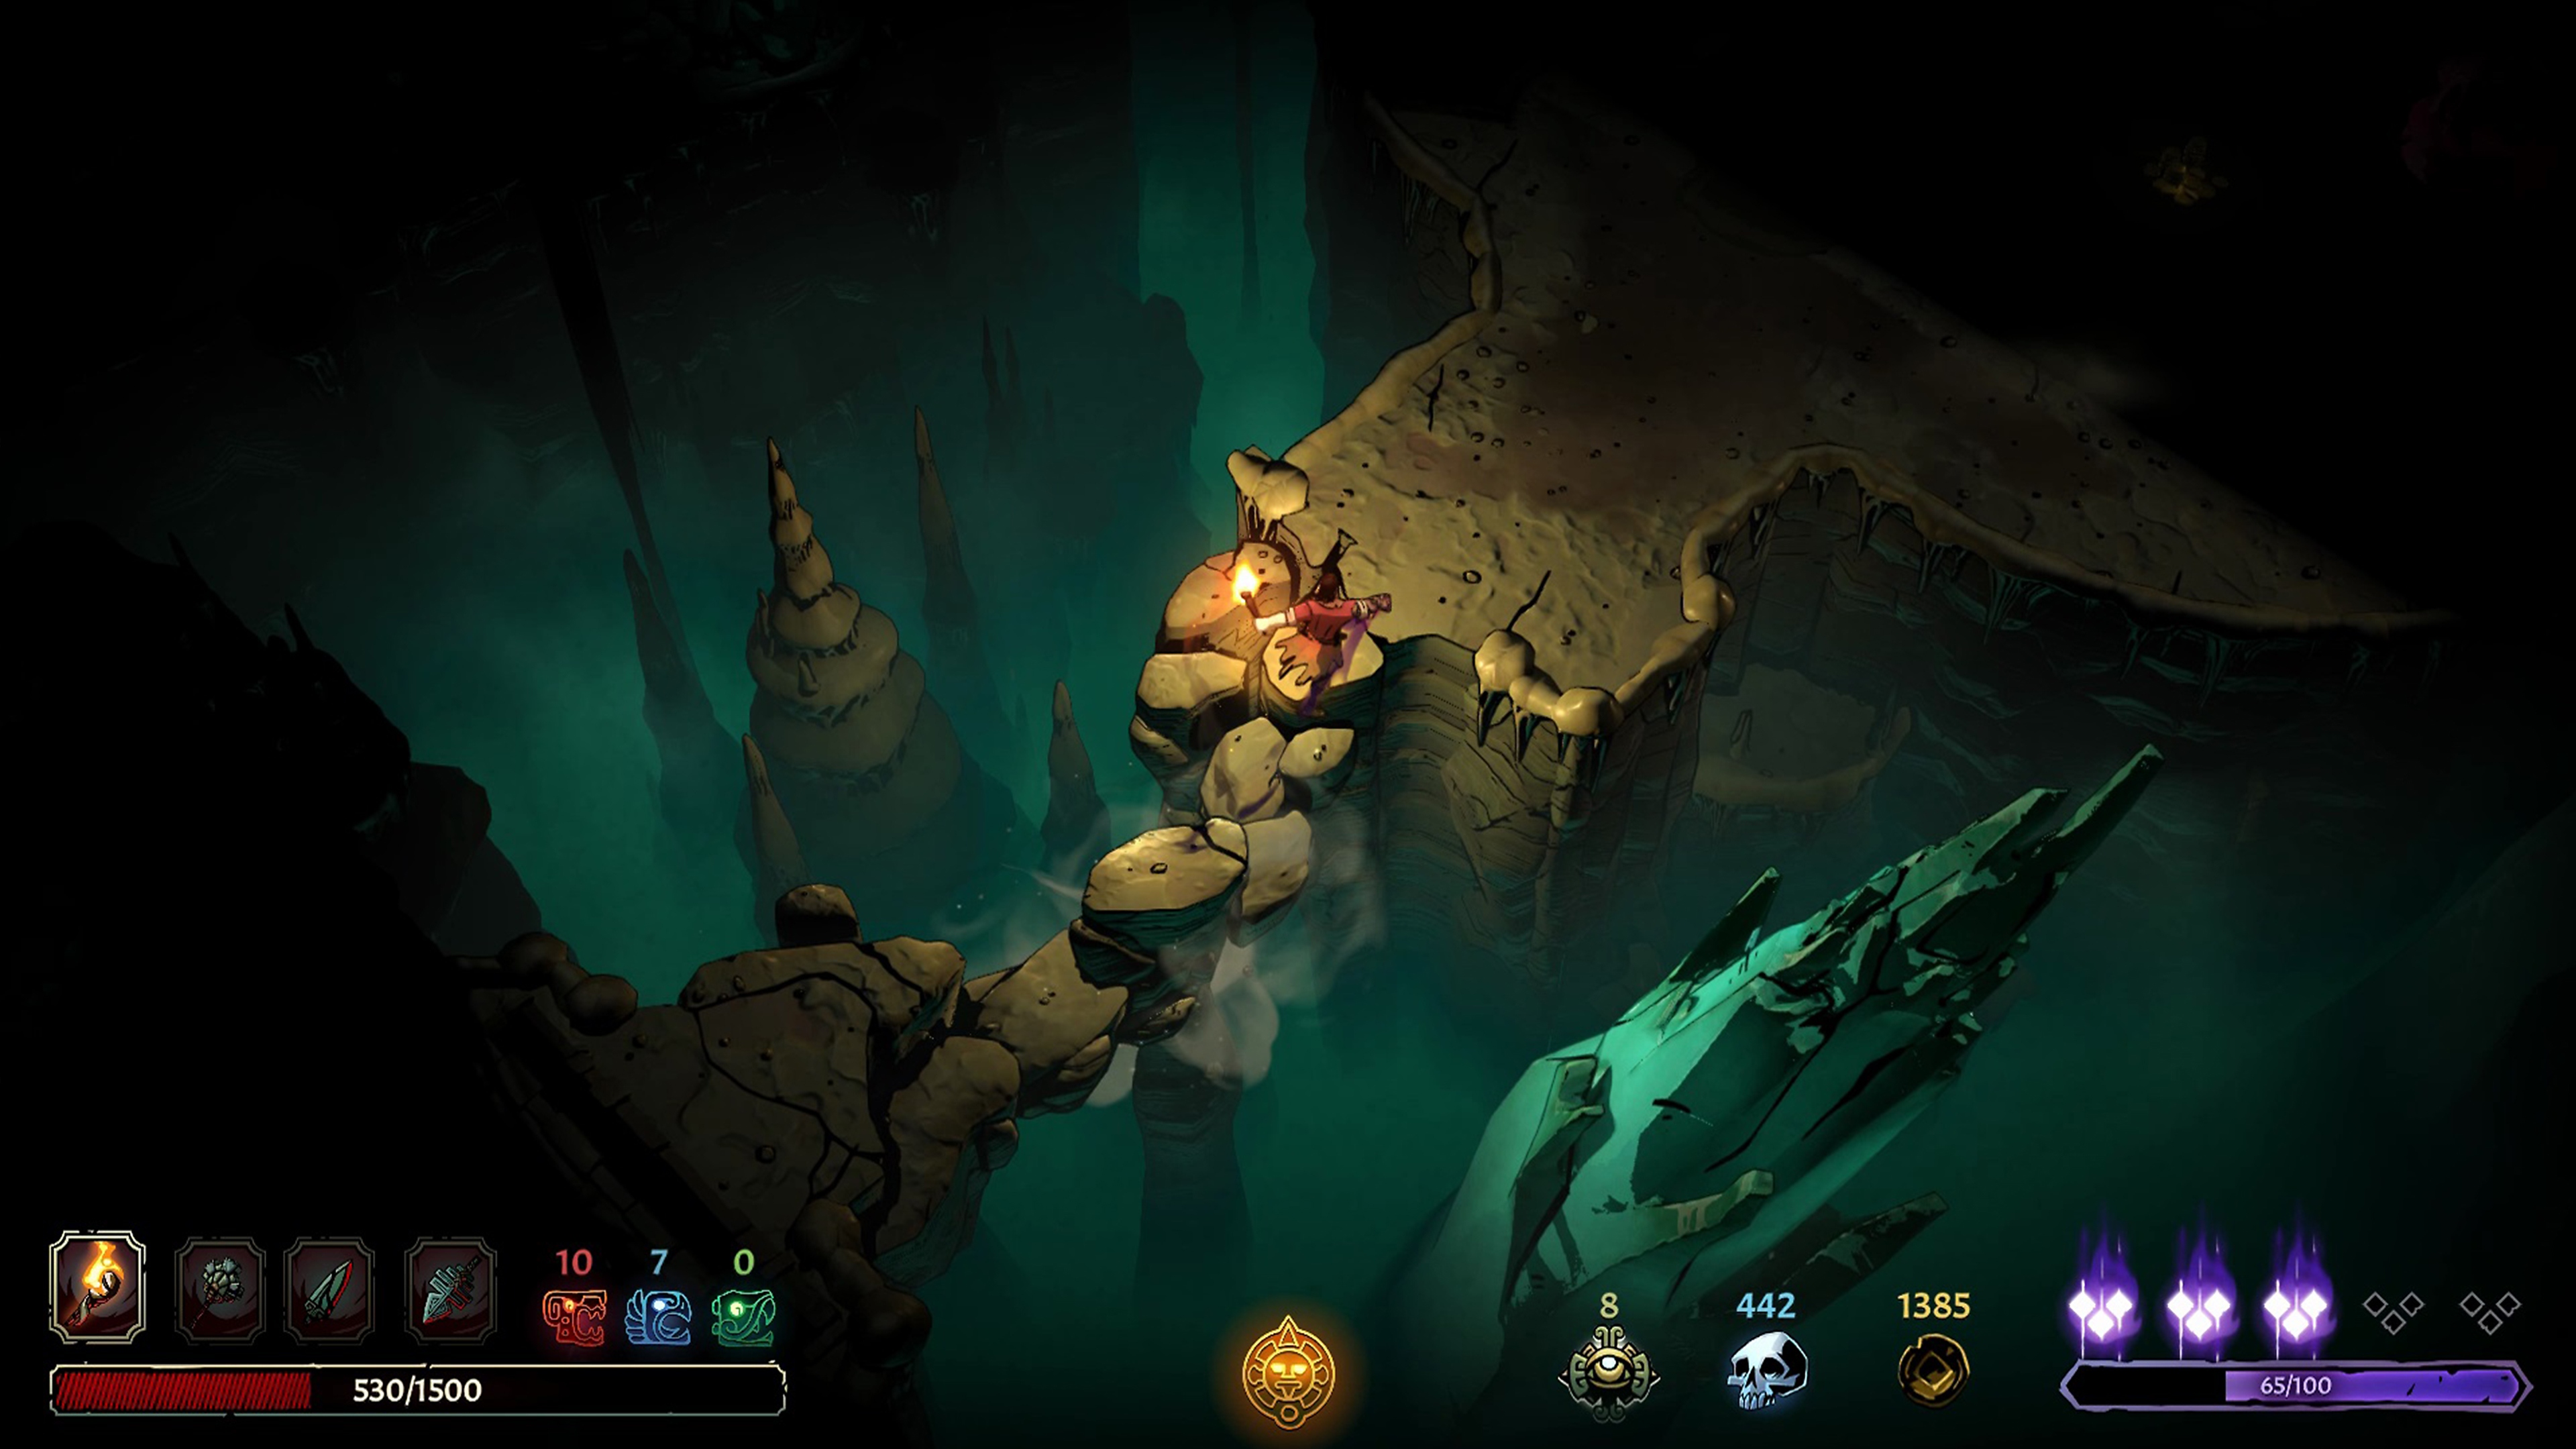 Curse of the Dead gods screenshot showing exploration gameplay